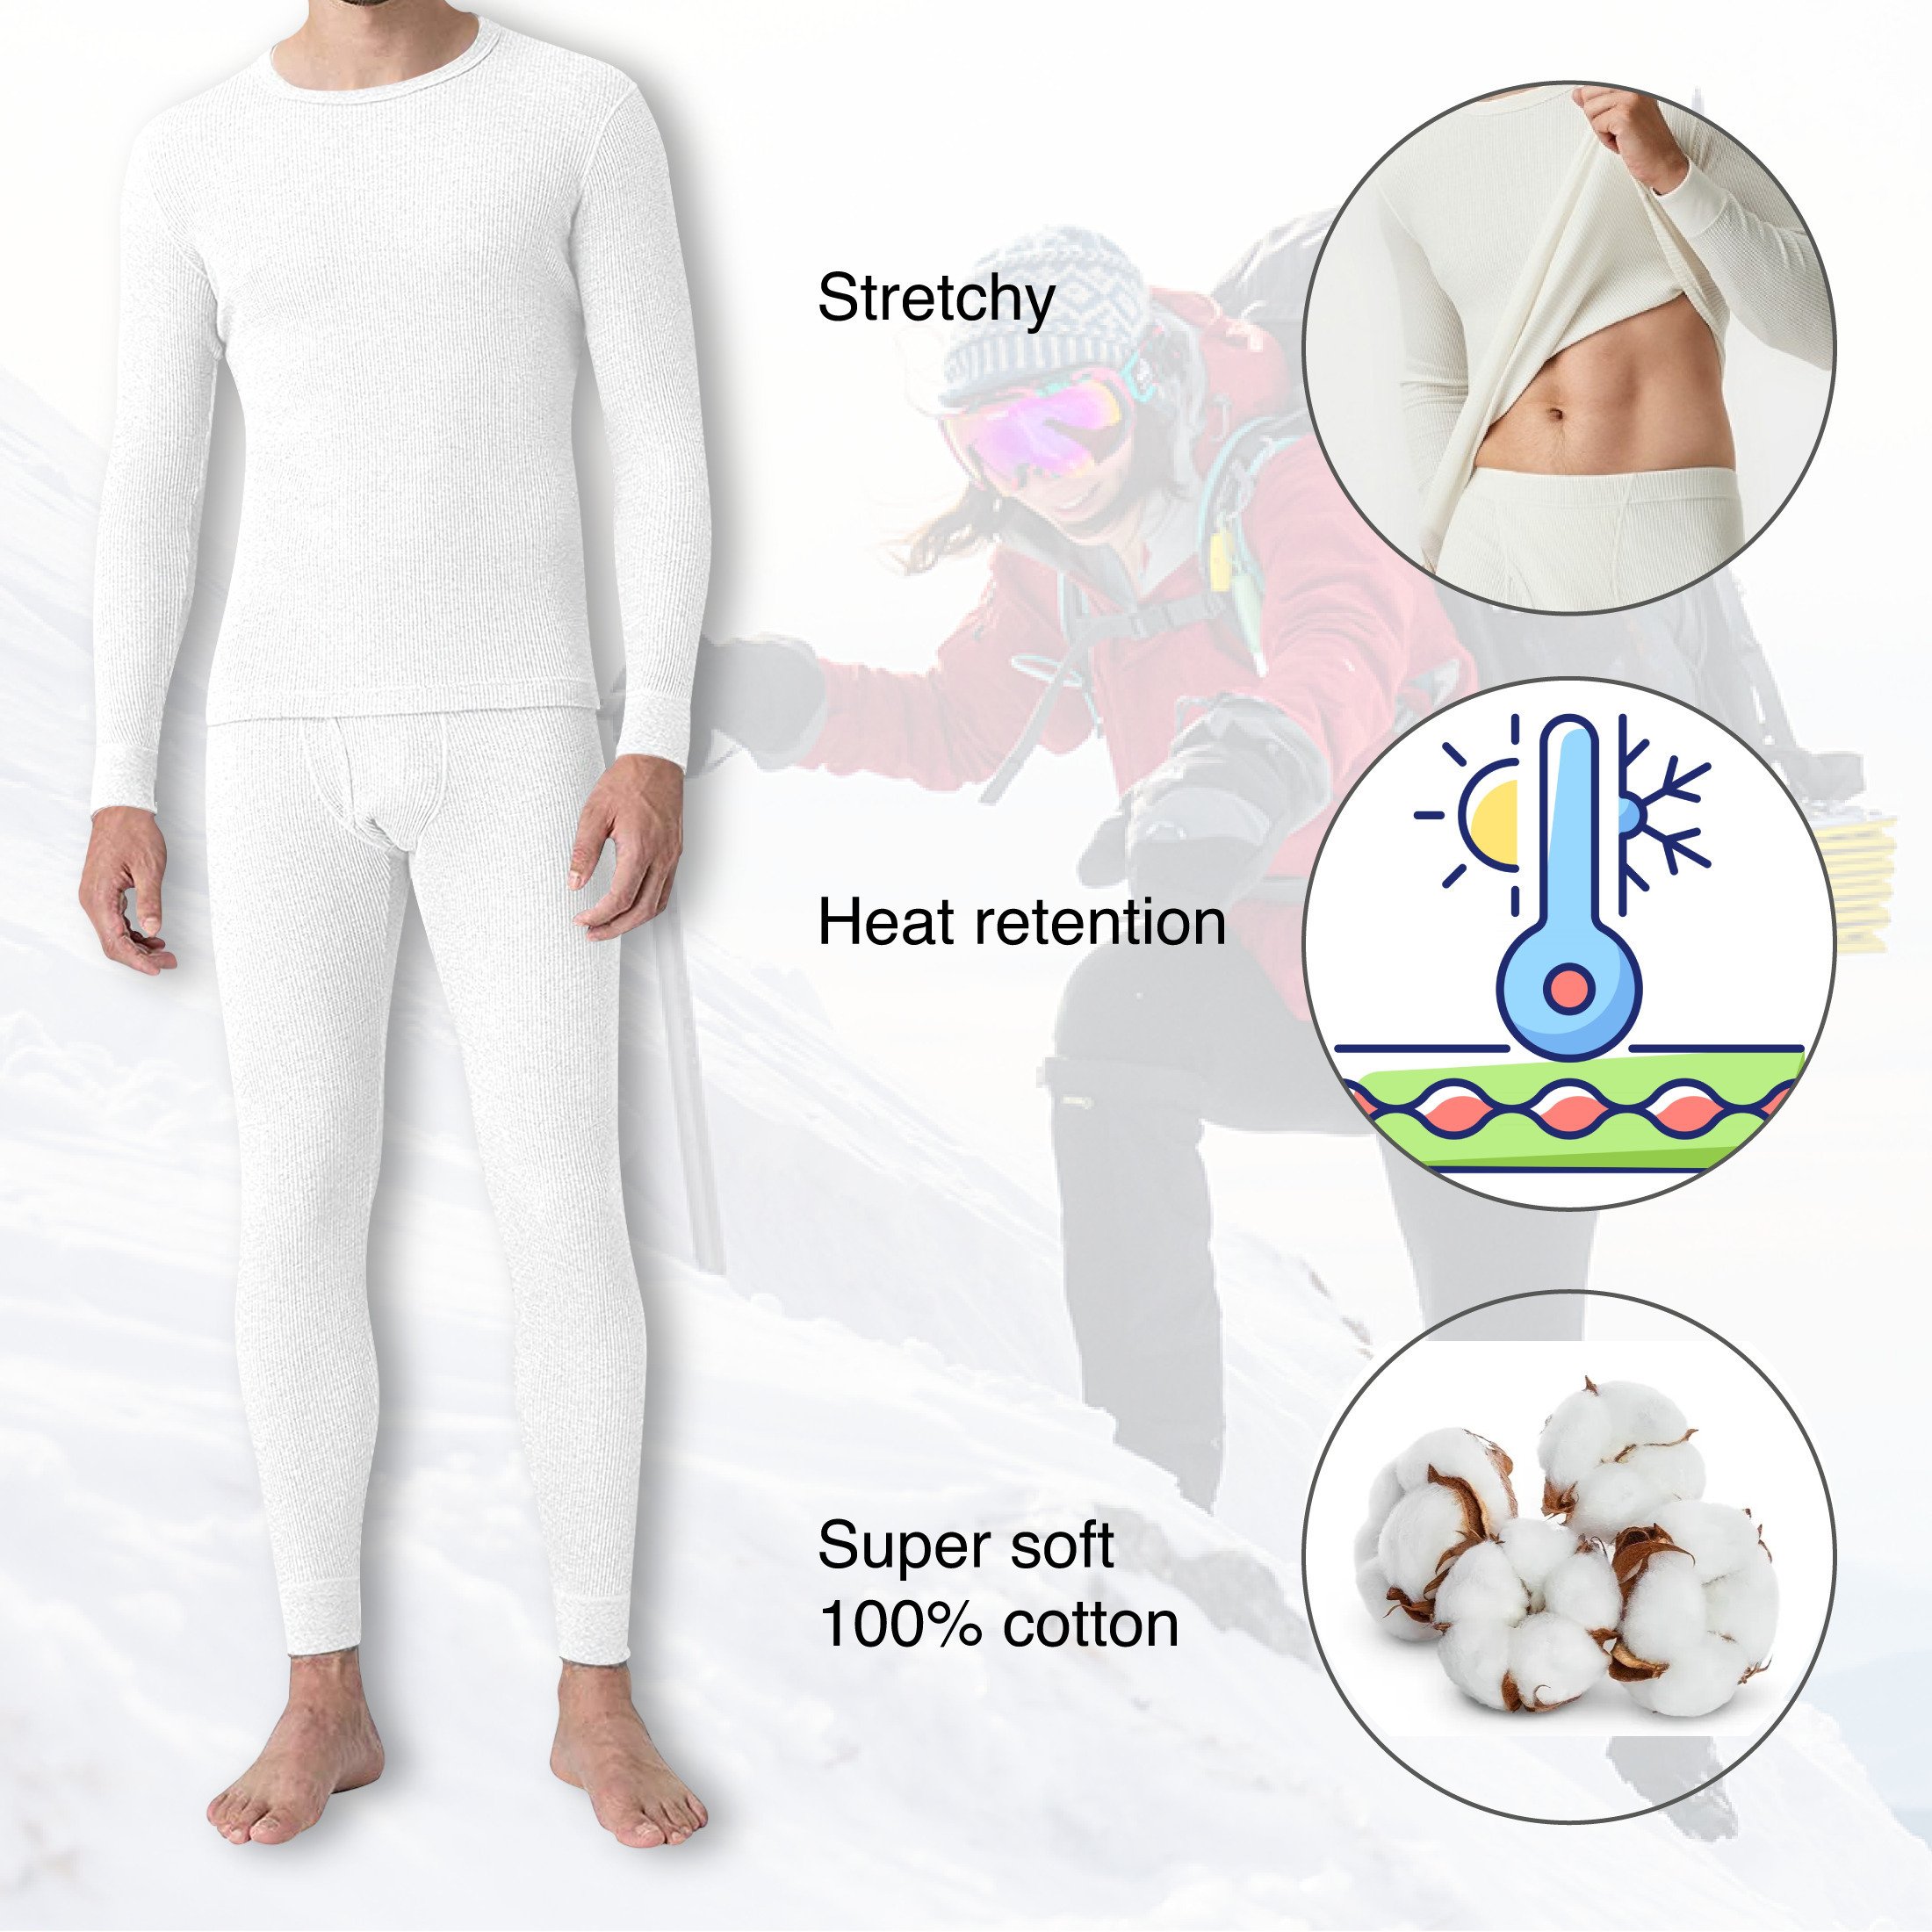 2-Sets: Men's Super Soft Cotton Waffle Knit Winter Thermal Underwear Set - Grey & Navy, Small